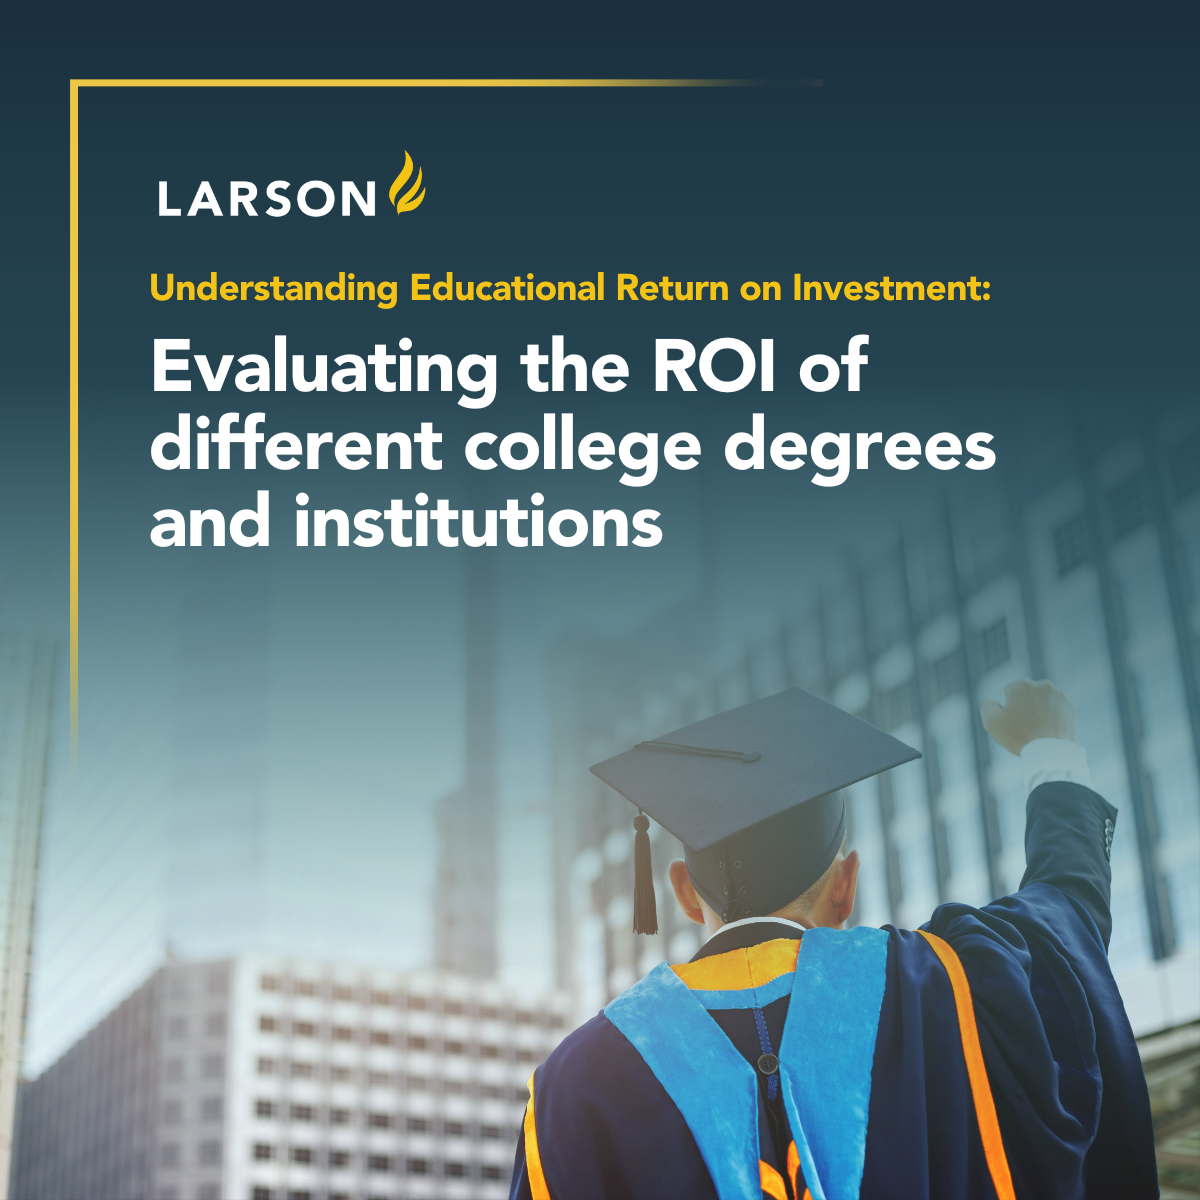 As a savvy investor, you already know about ROI (Return on Investment) and why it’s important. But have you considered educational ROI?